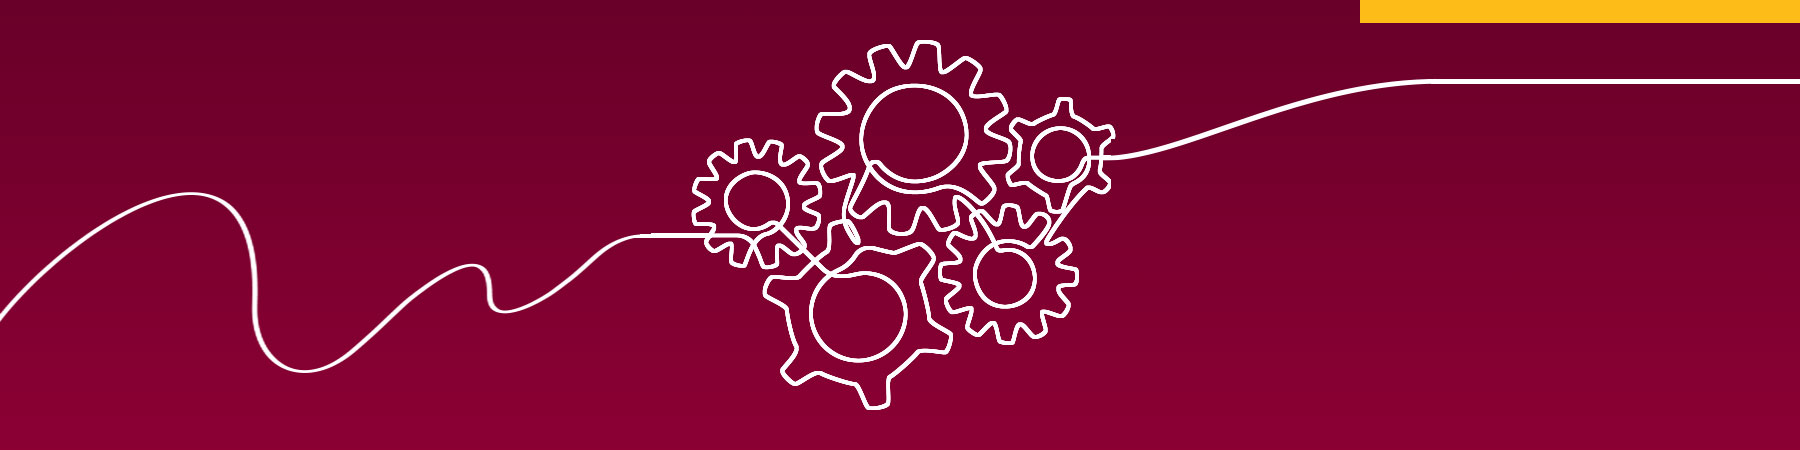 White line illustration of working gears, against a maroon background, to demonstrate Loyola University Chicago's school-based marcom team.